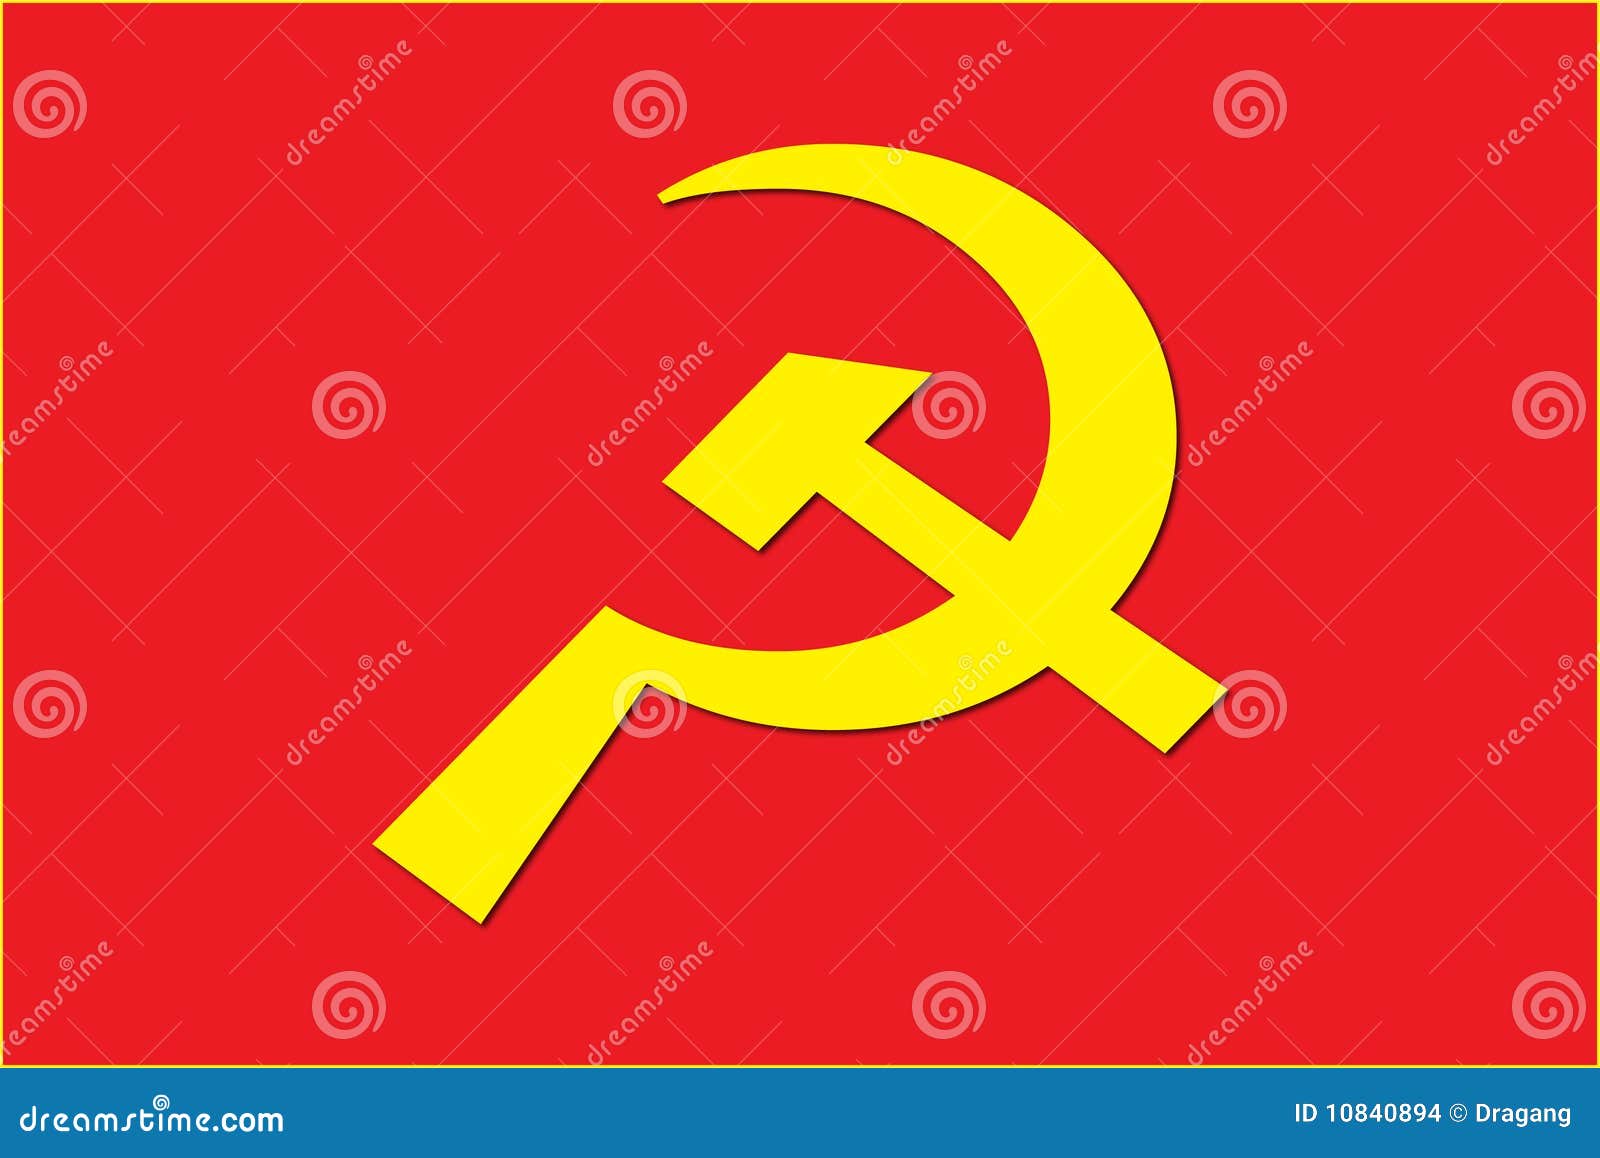 Hammer And Sickle Stock Images - Image: 10840894